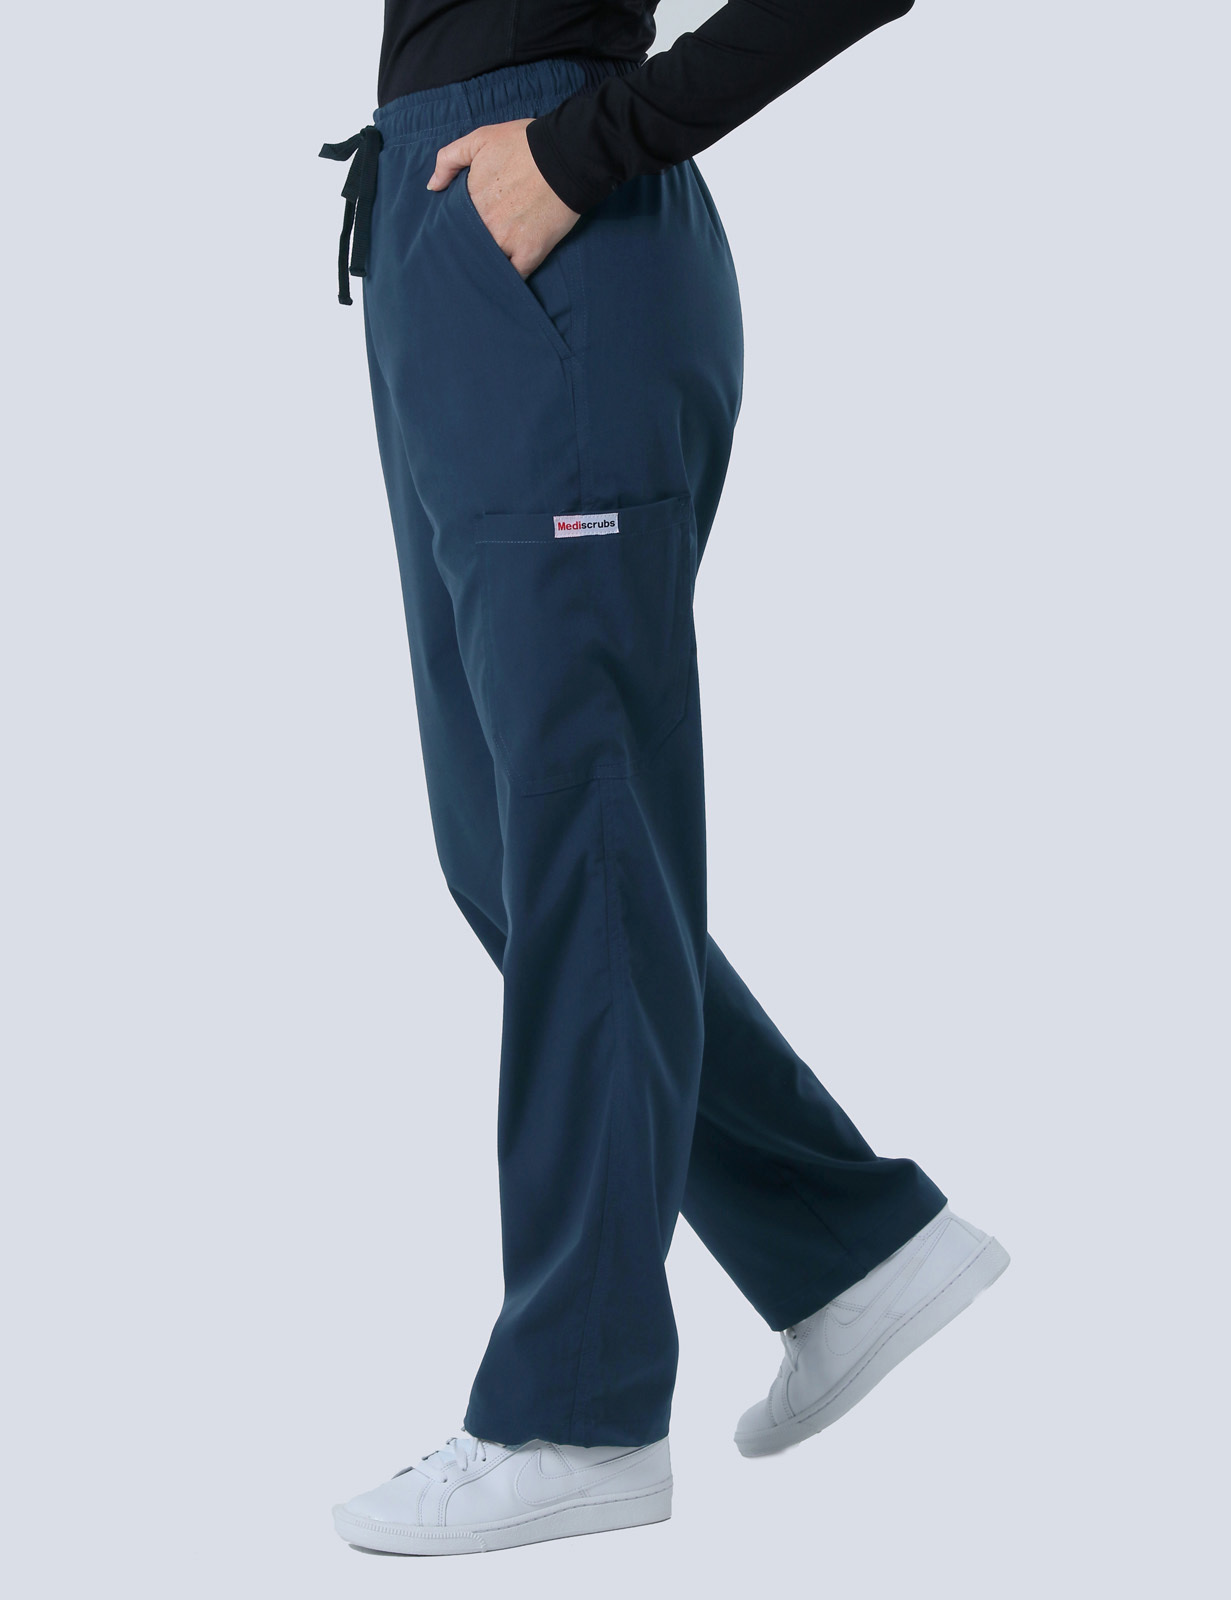 The Alfred Hospital - 2F Medical Short Stay - Nursing (Women's Fit Solid Scrub Top and Cargo Pants in Navy incl Logos)